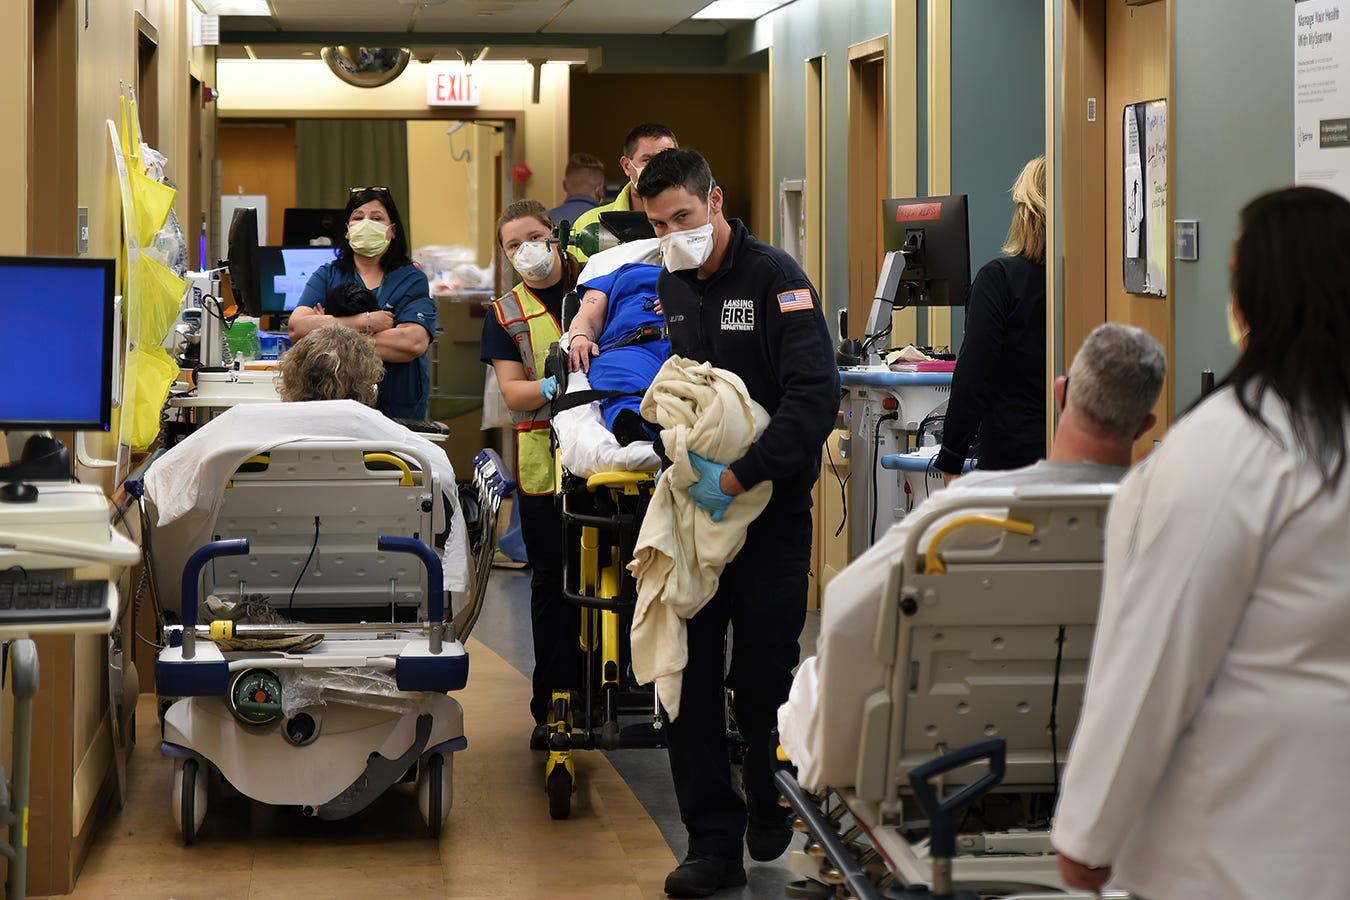 As ER overcrowding worsens, a program helping to ease the crisis may lose funding